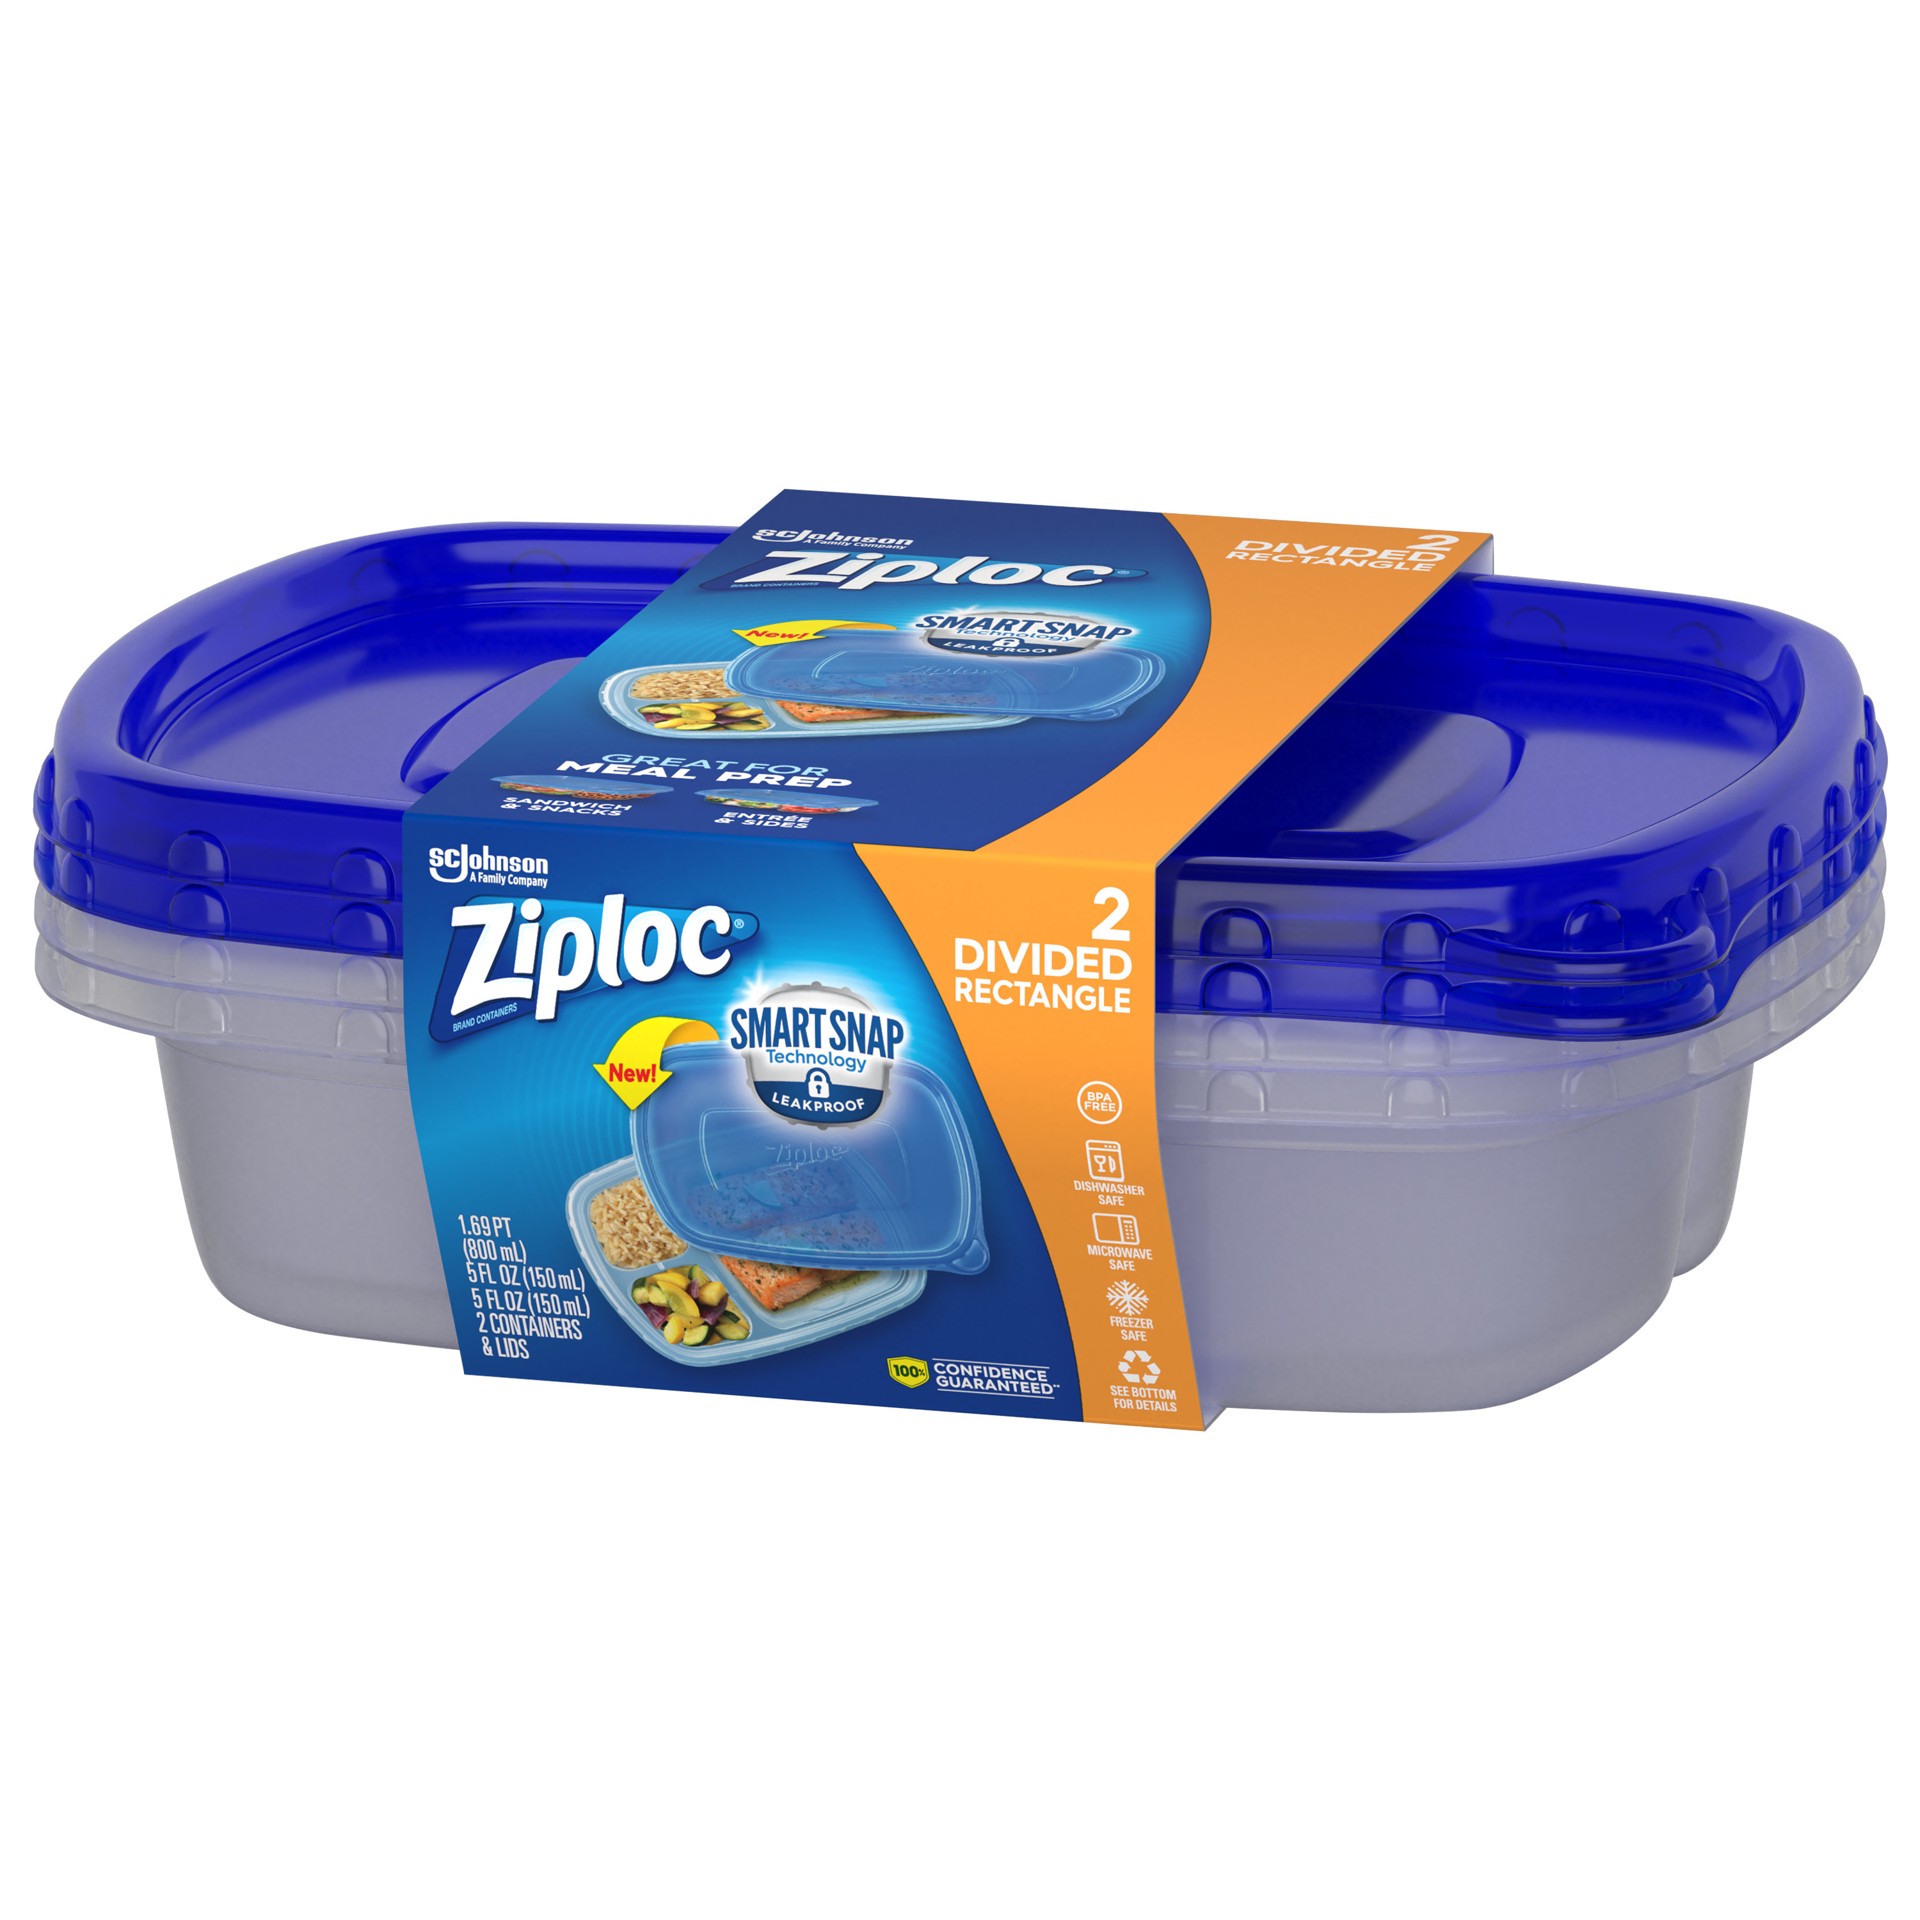 slide 5 of 5, Ziploc Smart Snap Divided Rectangle Containers & Lids 2 Containers & Lids, 2 ct